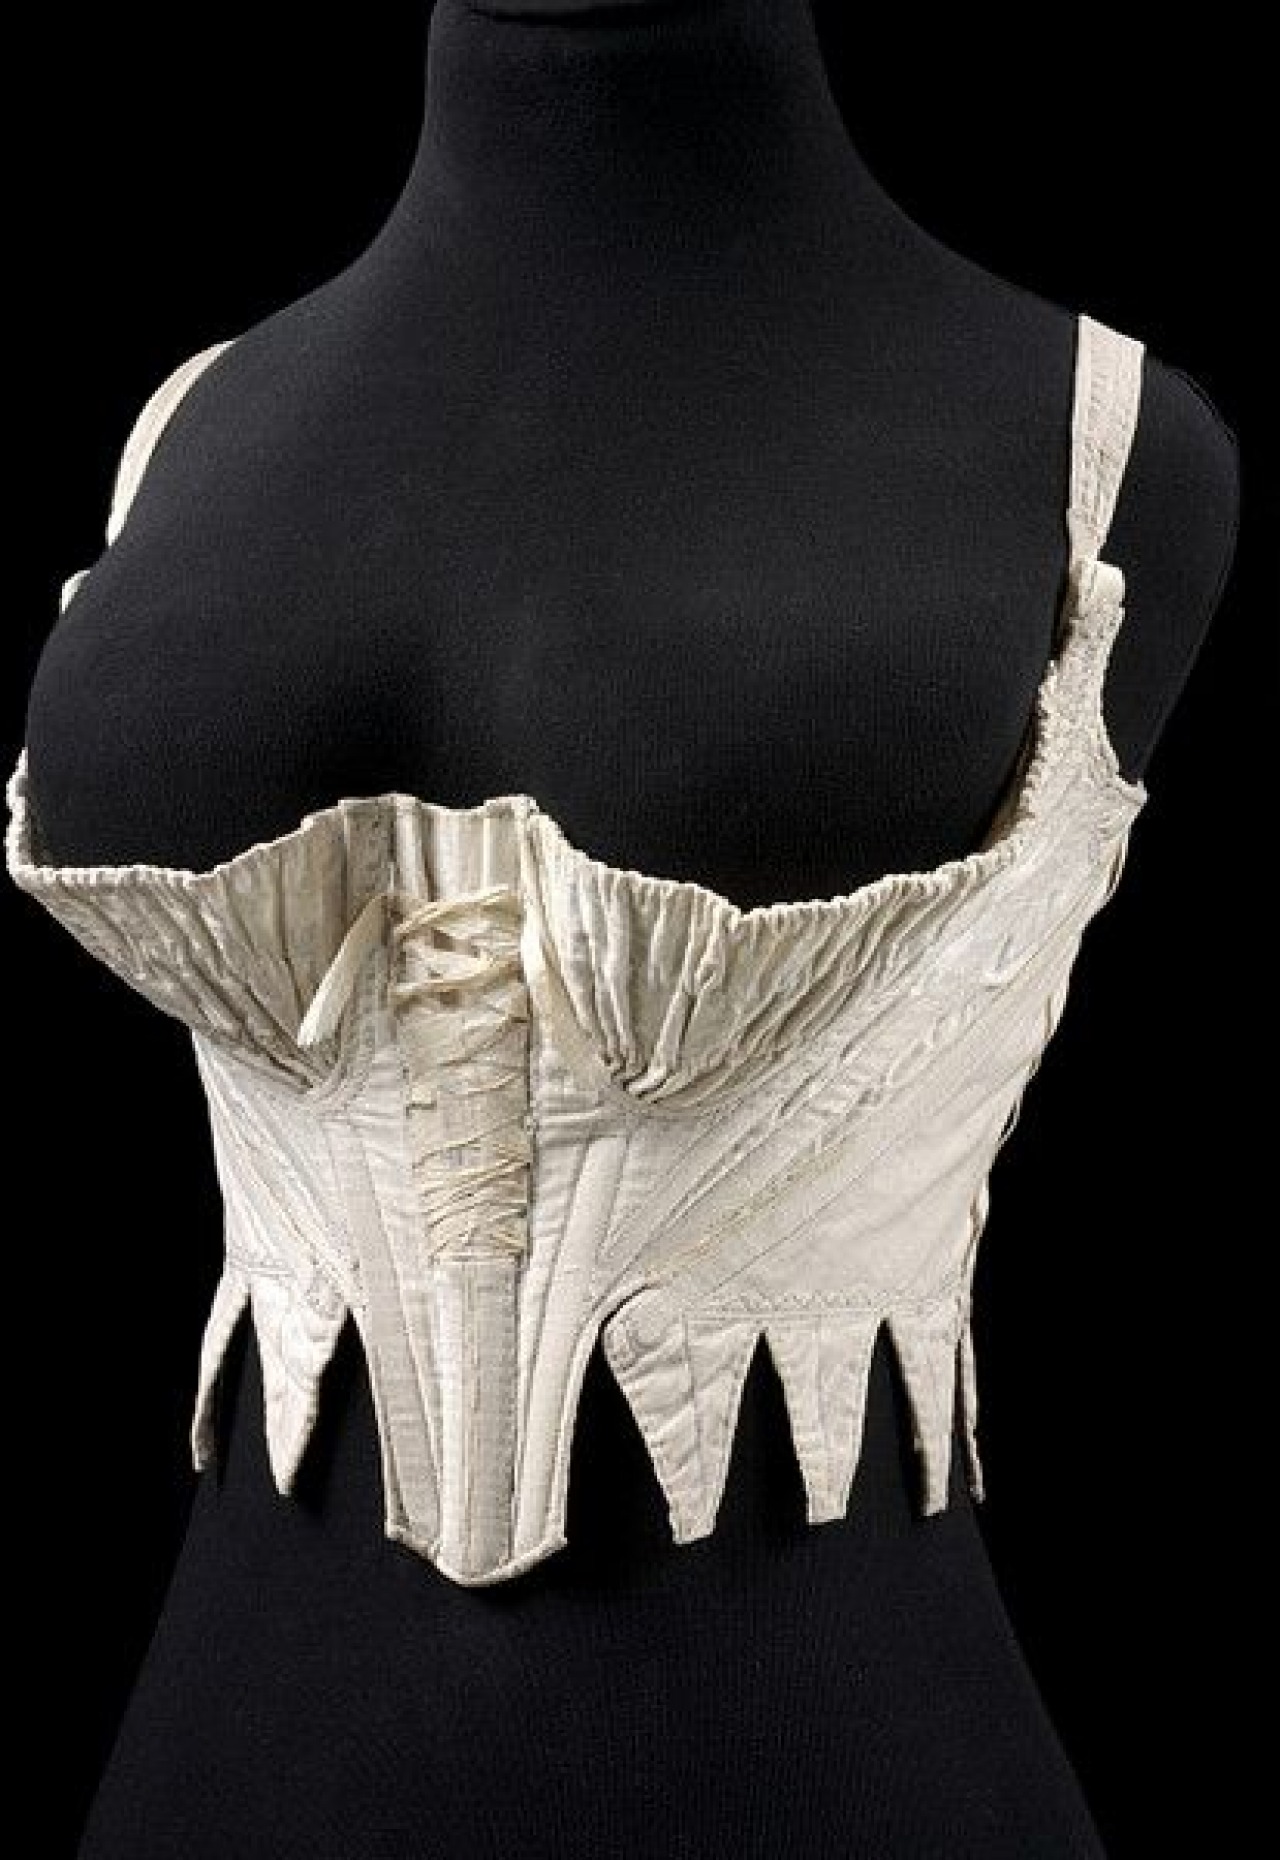 Women's Underwear in the Seventeenth Century Explained – Sarah A